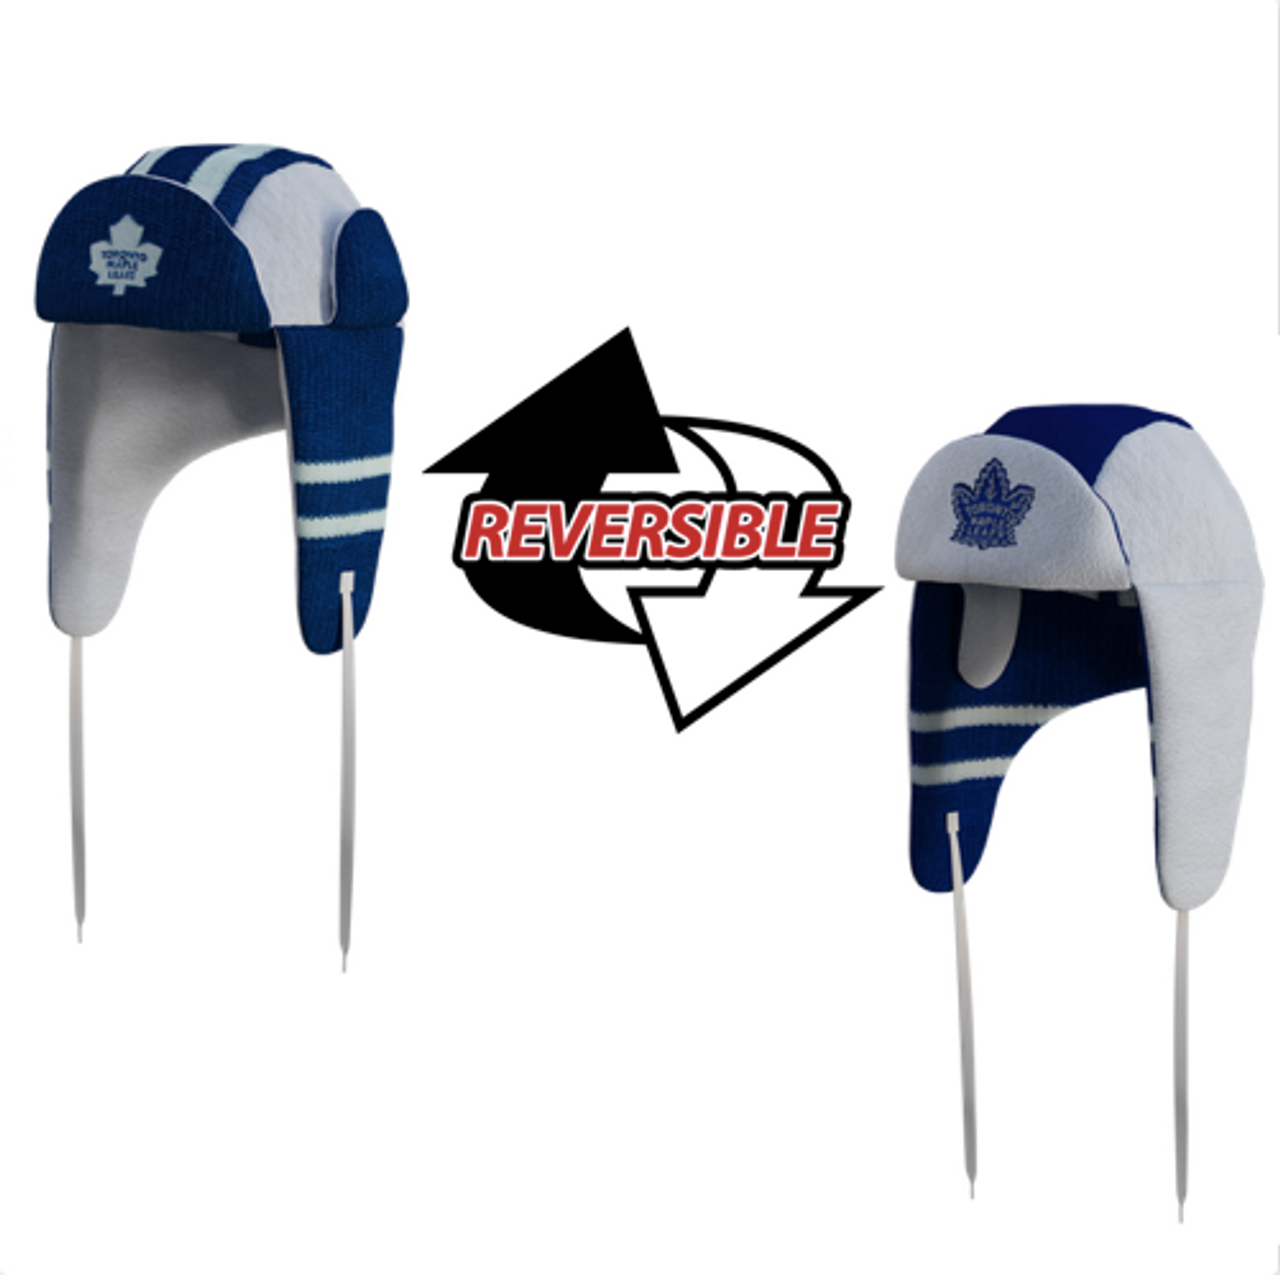 Toronto Maple Leafs Hats  Officially Licensed NHL Headwear